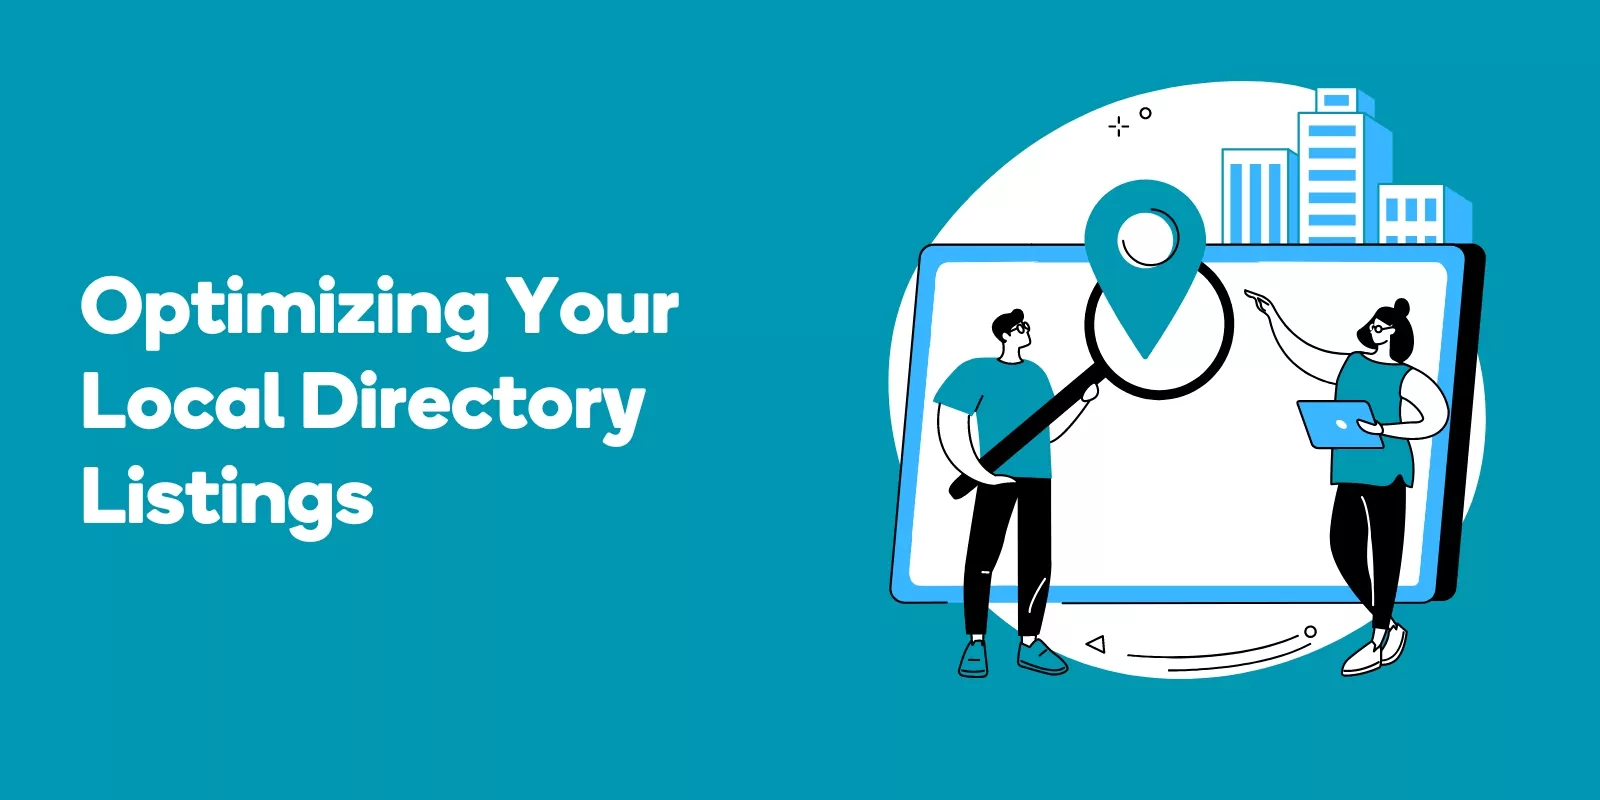 Optimizing Your Local Directory Listings